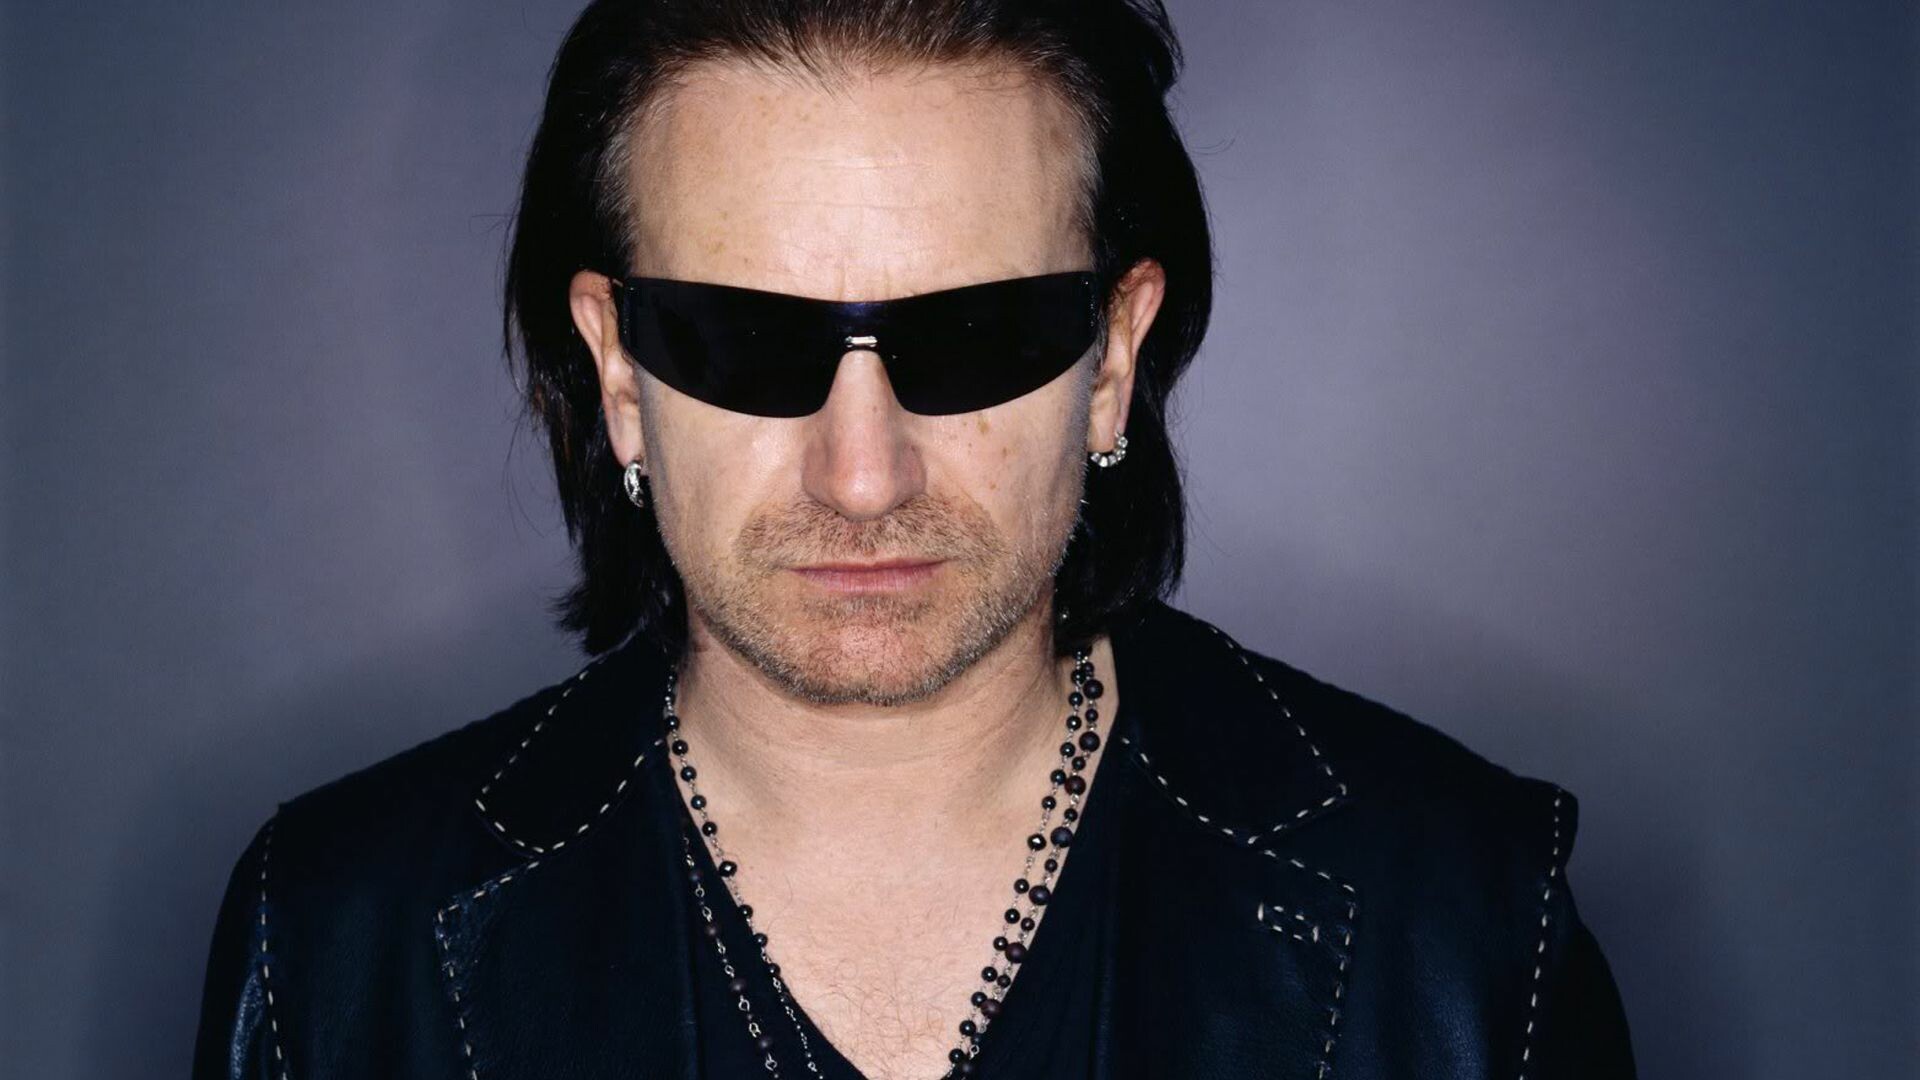 U2: Bono, The four-track EP Wide Awake in America was released in May 1985. 1920x1080 Full HD Wallpaper.